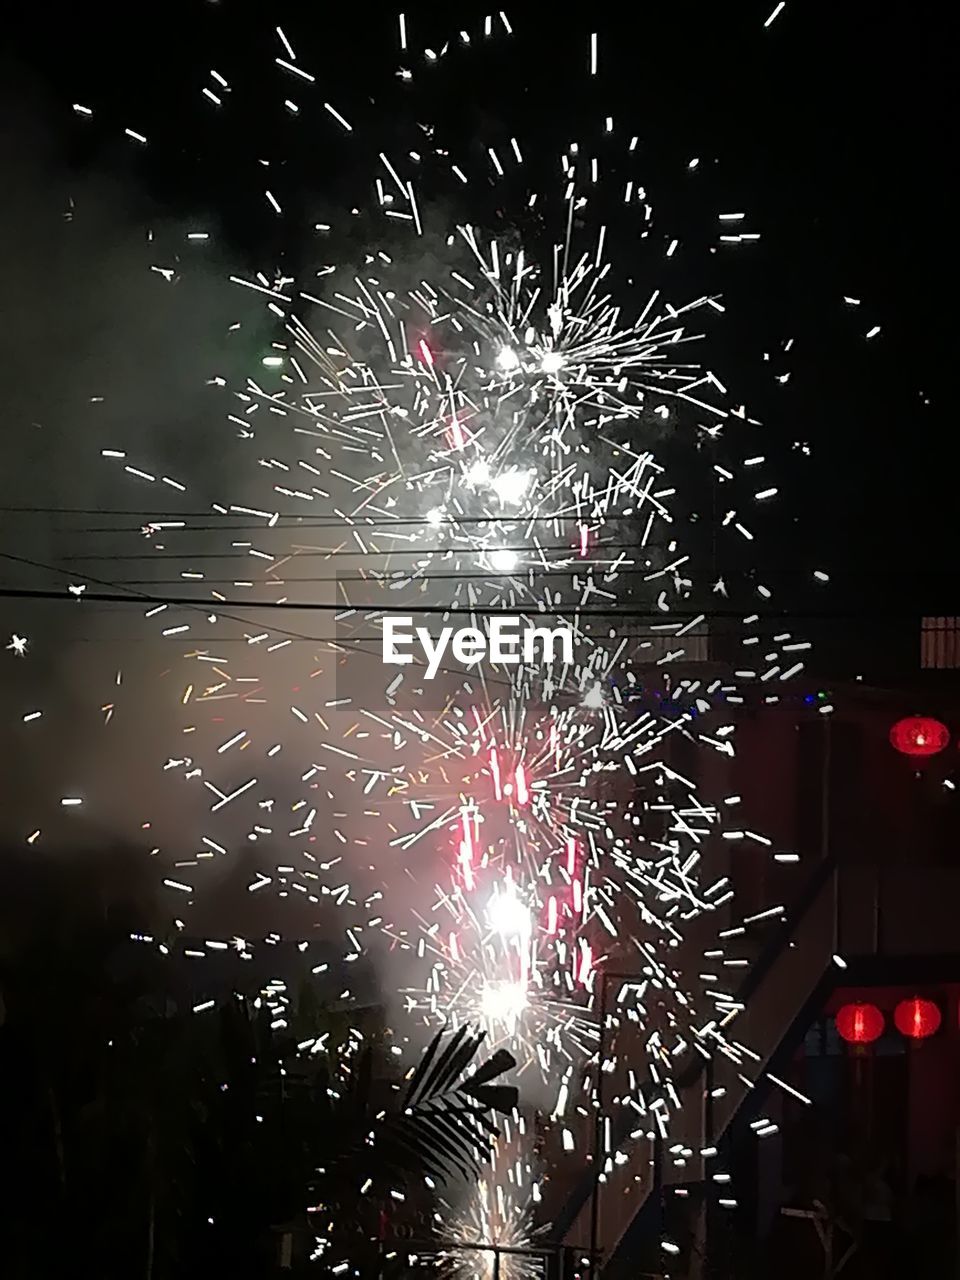 LOW ANGLE VIEW OF FIREWORKS DISPLAY AT NIGHT